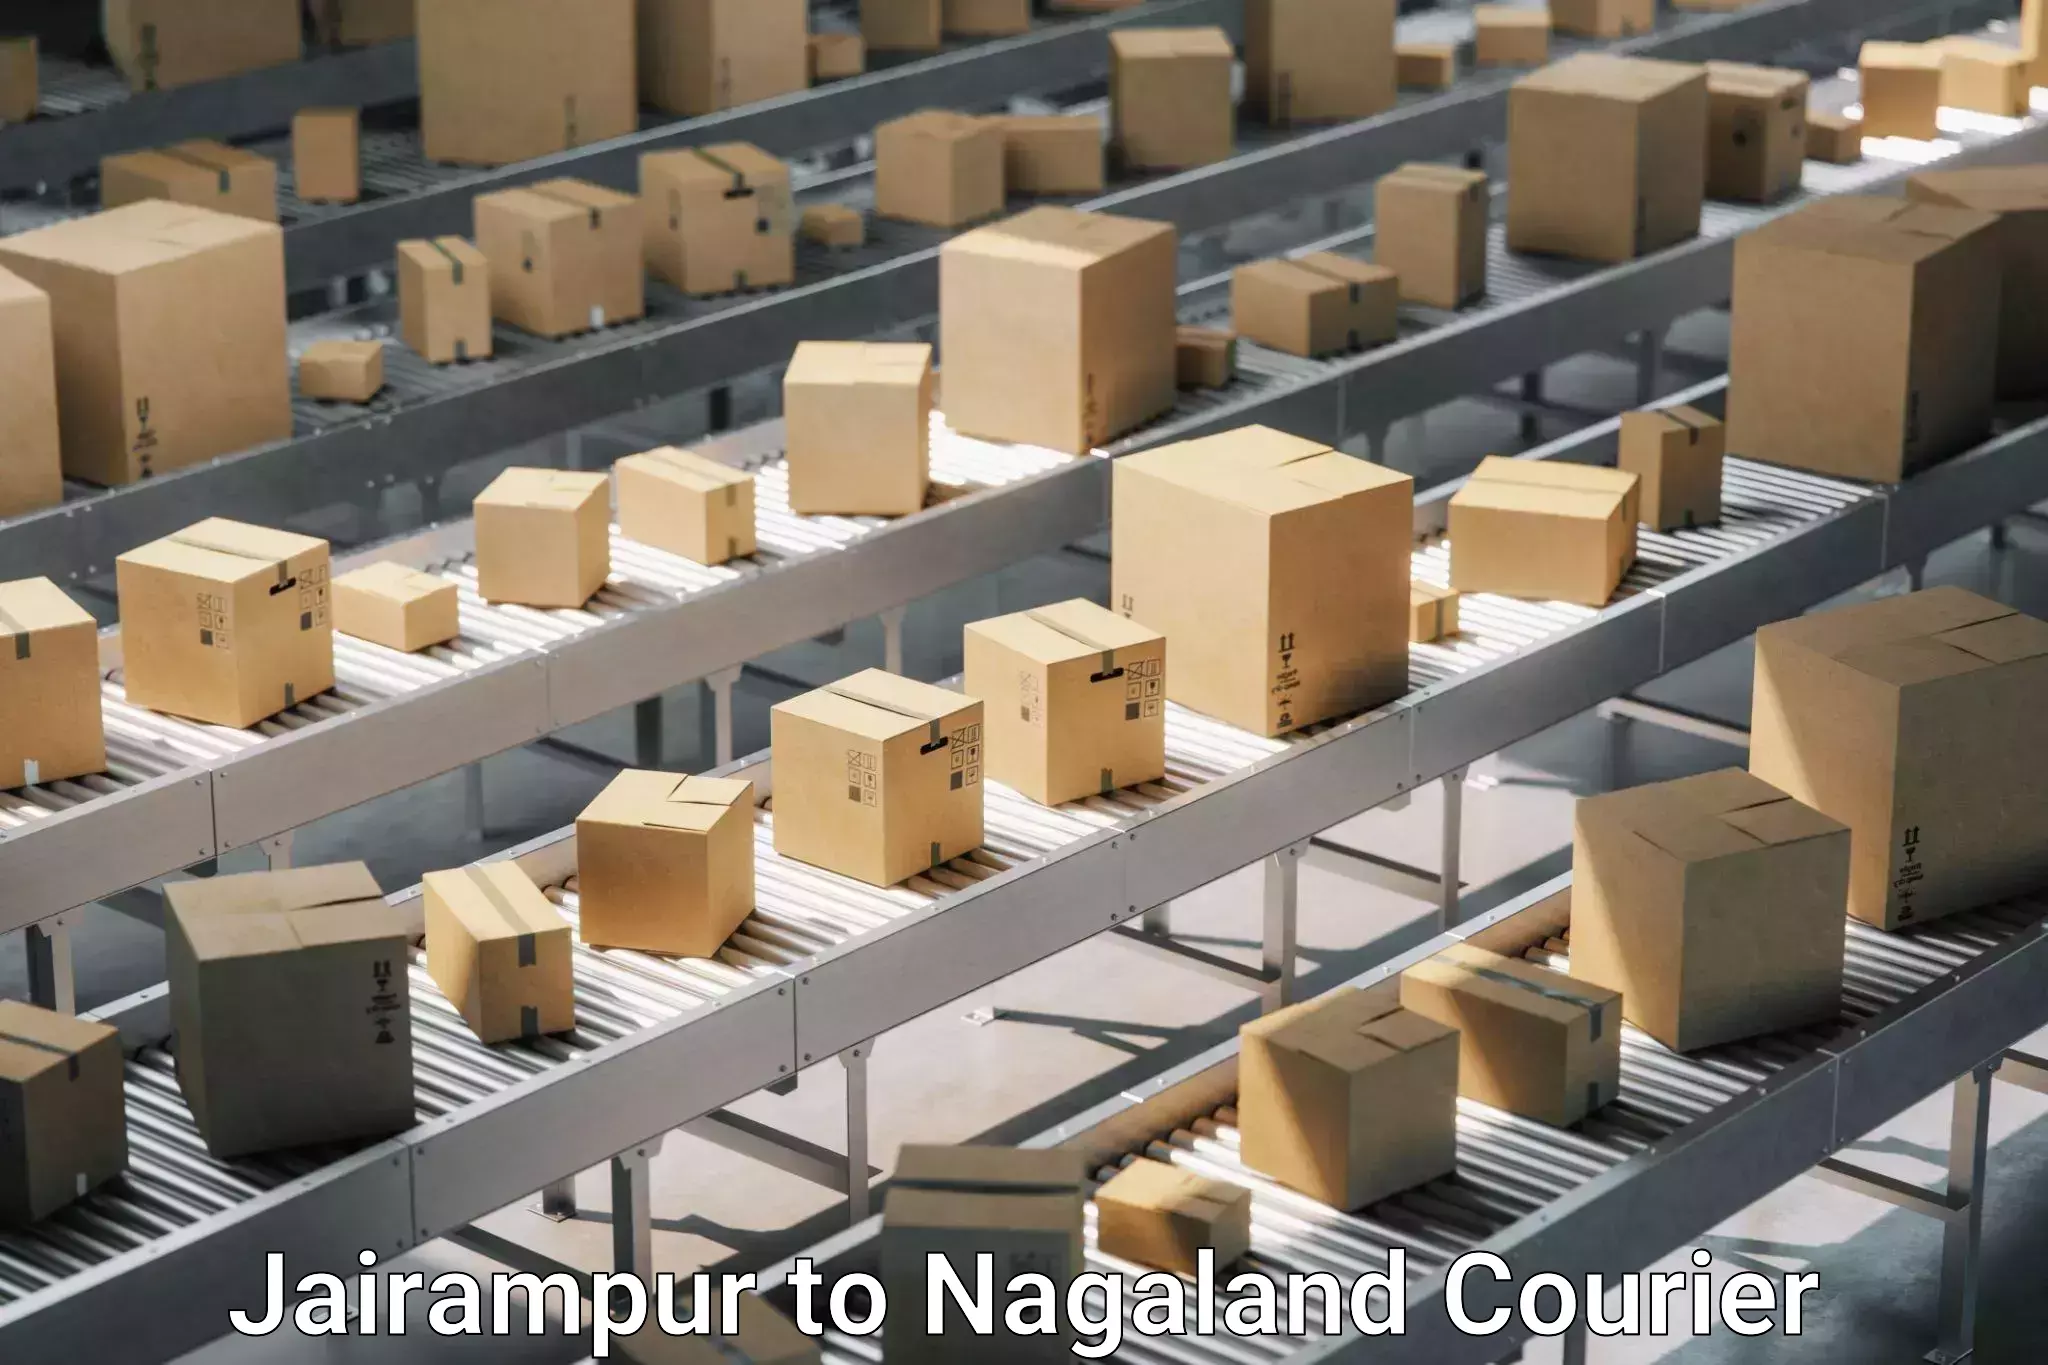 Furniture delivery service Jairampur to Nagaland